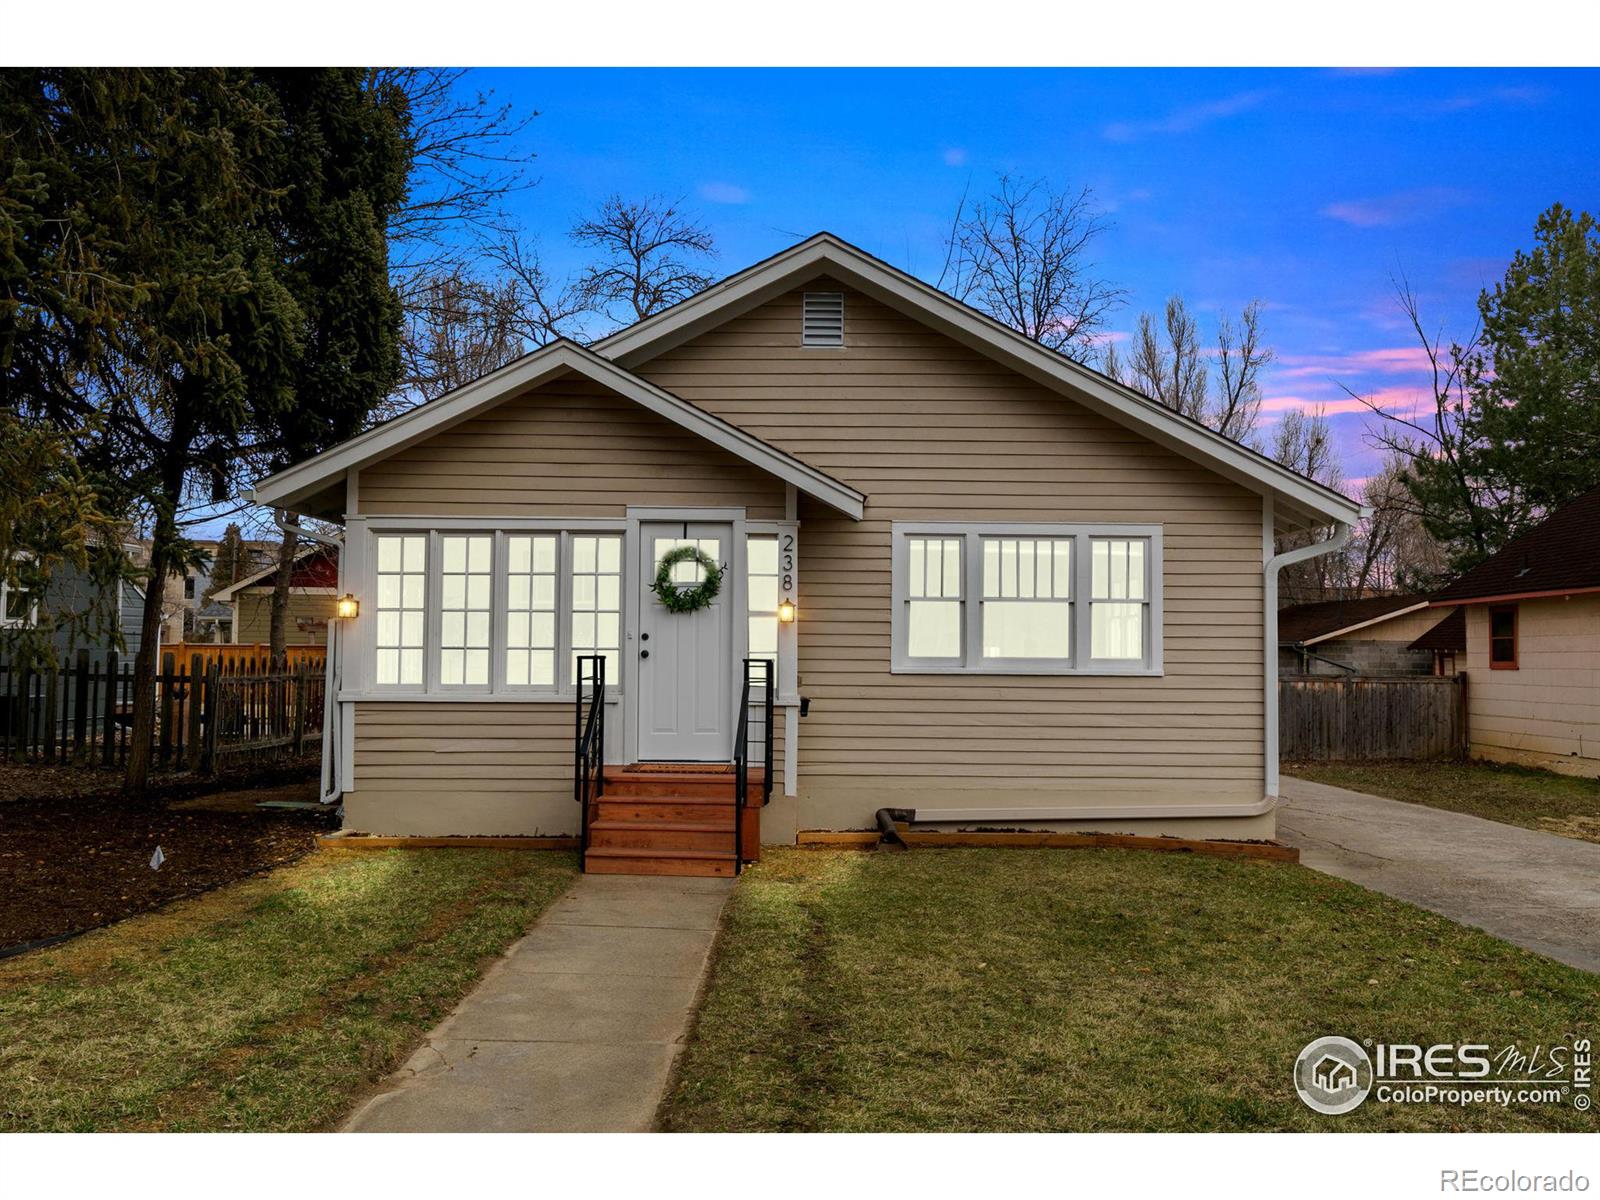 Report Image for 238 N Sherwood Street,Fort Collins, Colorado